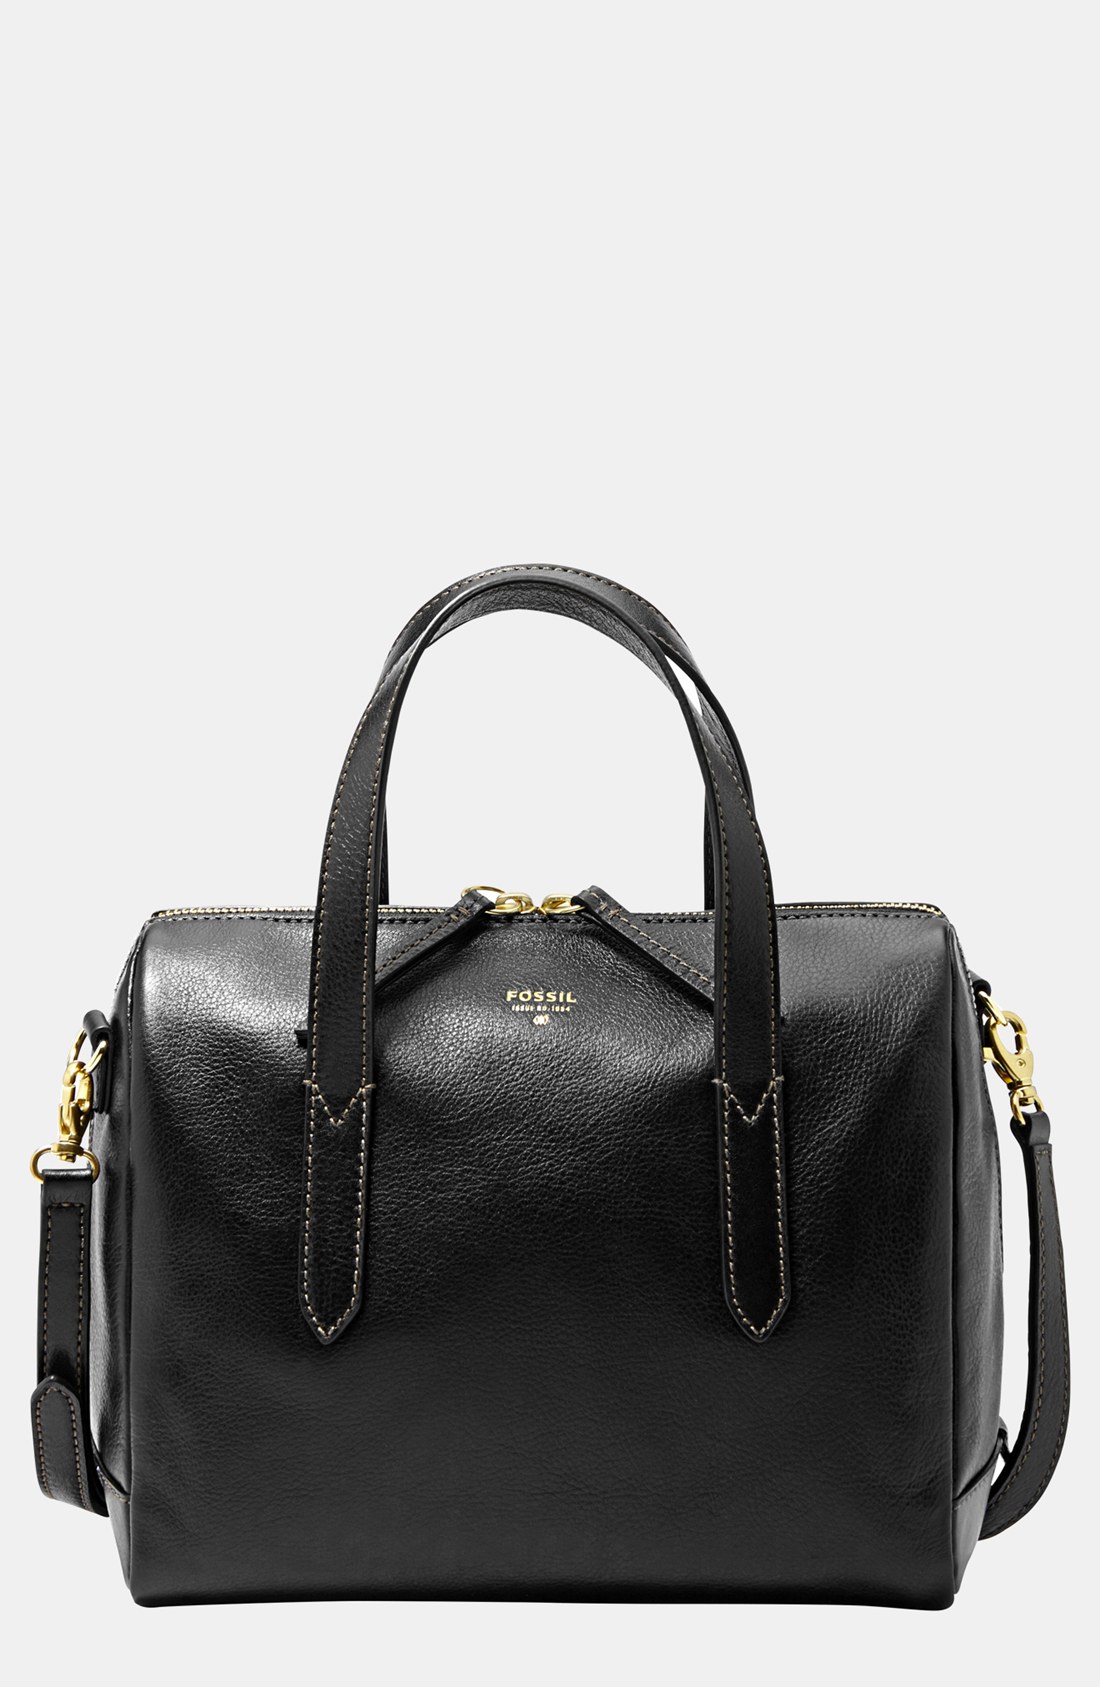 Fossil Sydney Leather Satchel in Black | Lyst